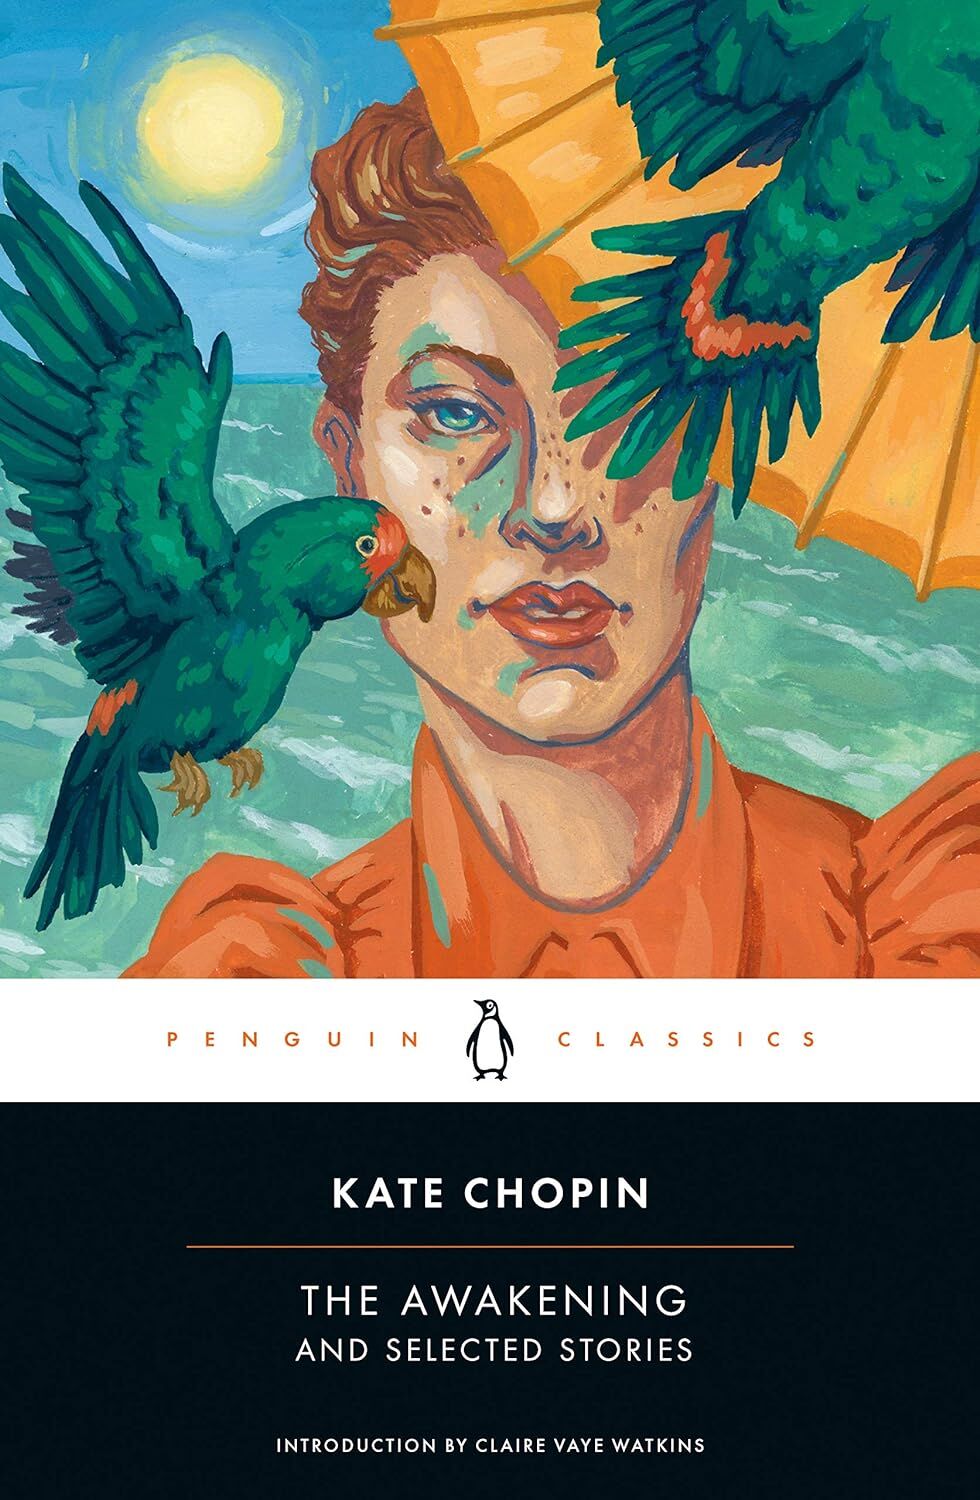 Kate Chopin - Library of America